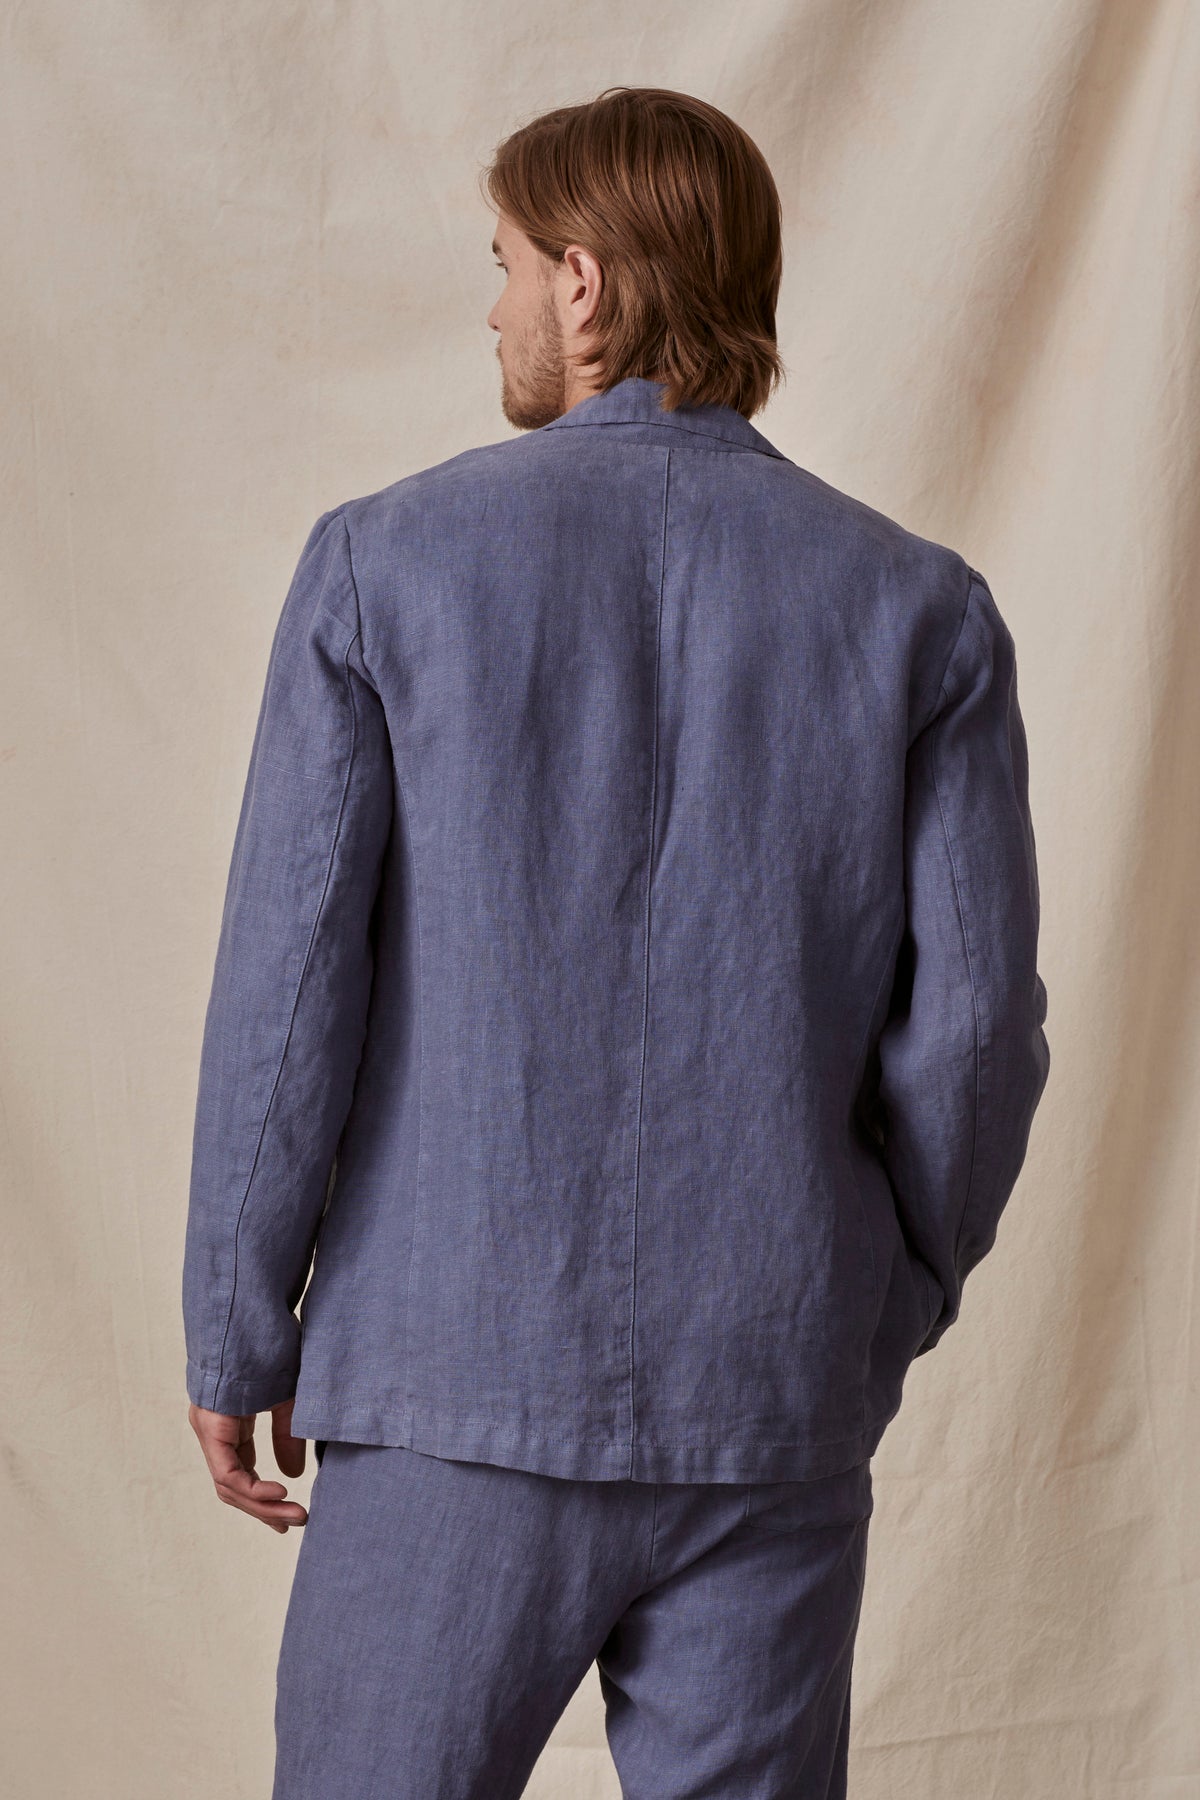 A man viewed from the back wearing a casual blue linen shirt and Phelan Linen Pant against a beige background in the JOSHUA LINEN BLAZER by Velvet by Graham & Spencer.-36805484871873